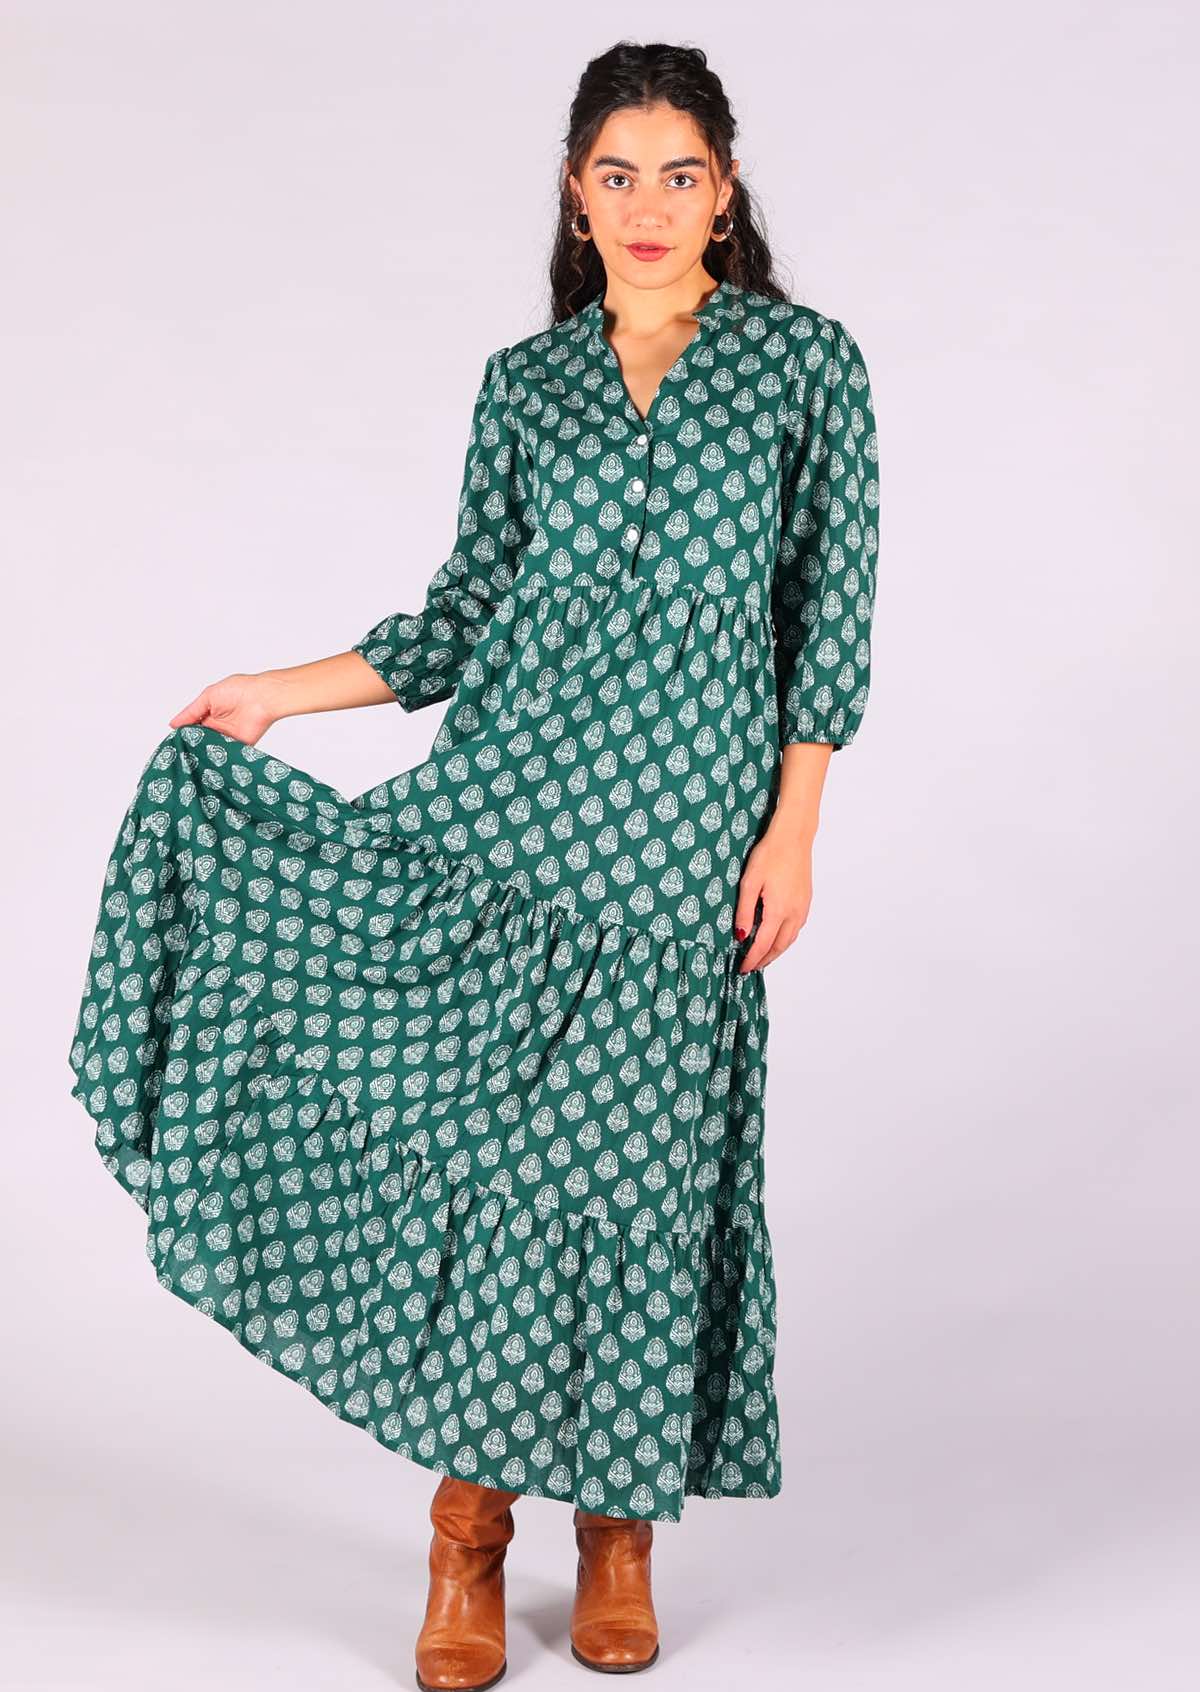 Live your boho dreams in this cotton tiered maxi dress, looks great belted too